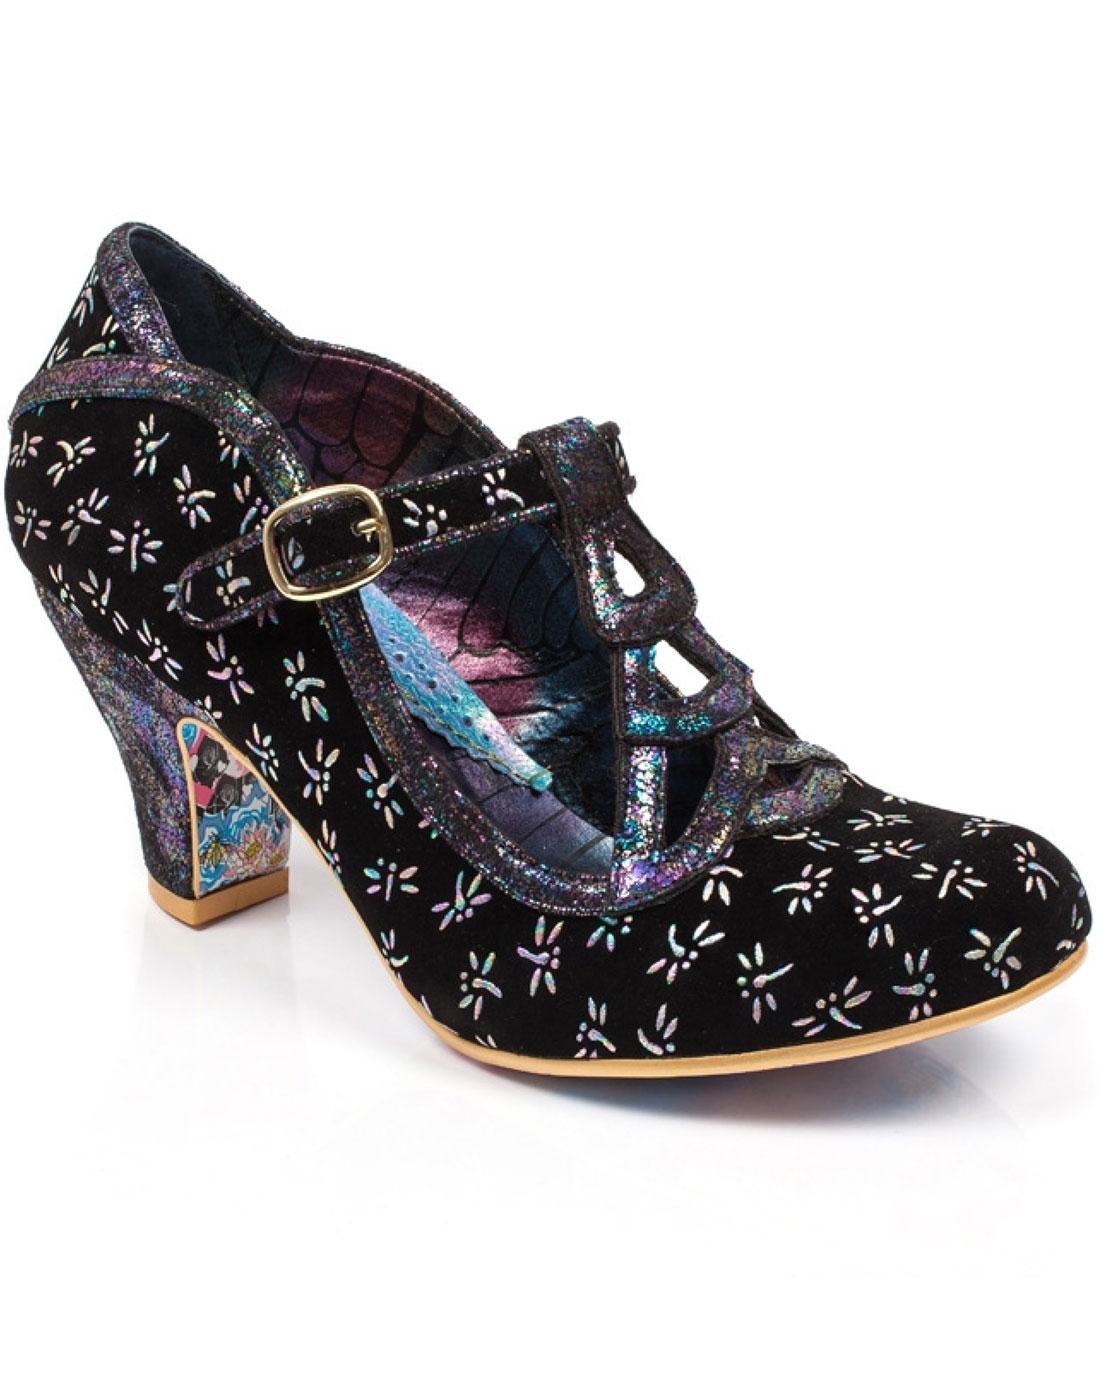 Irregular Choice NEW Nicely Done blue navy dragonfly mid heel shoes sizes 4-9 uk 